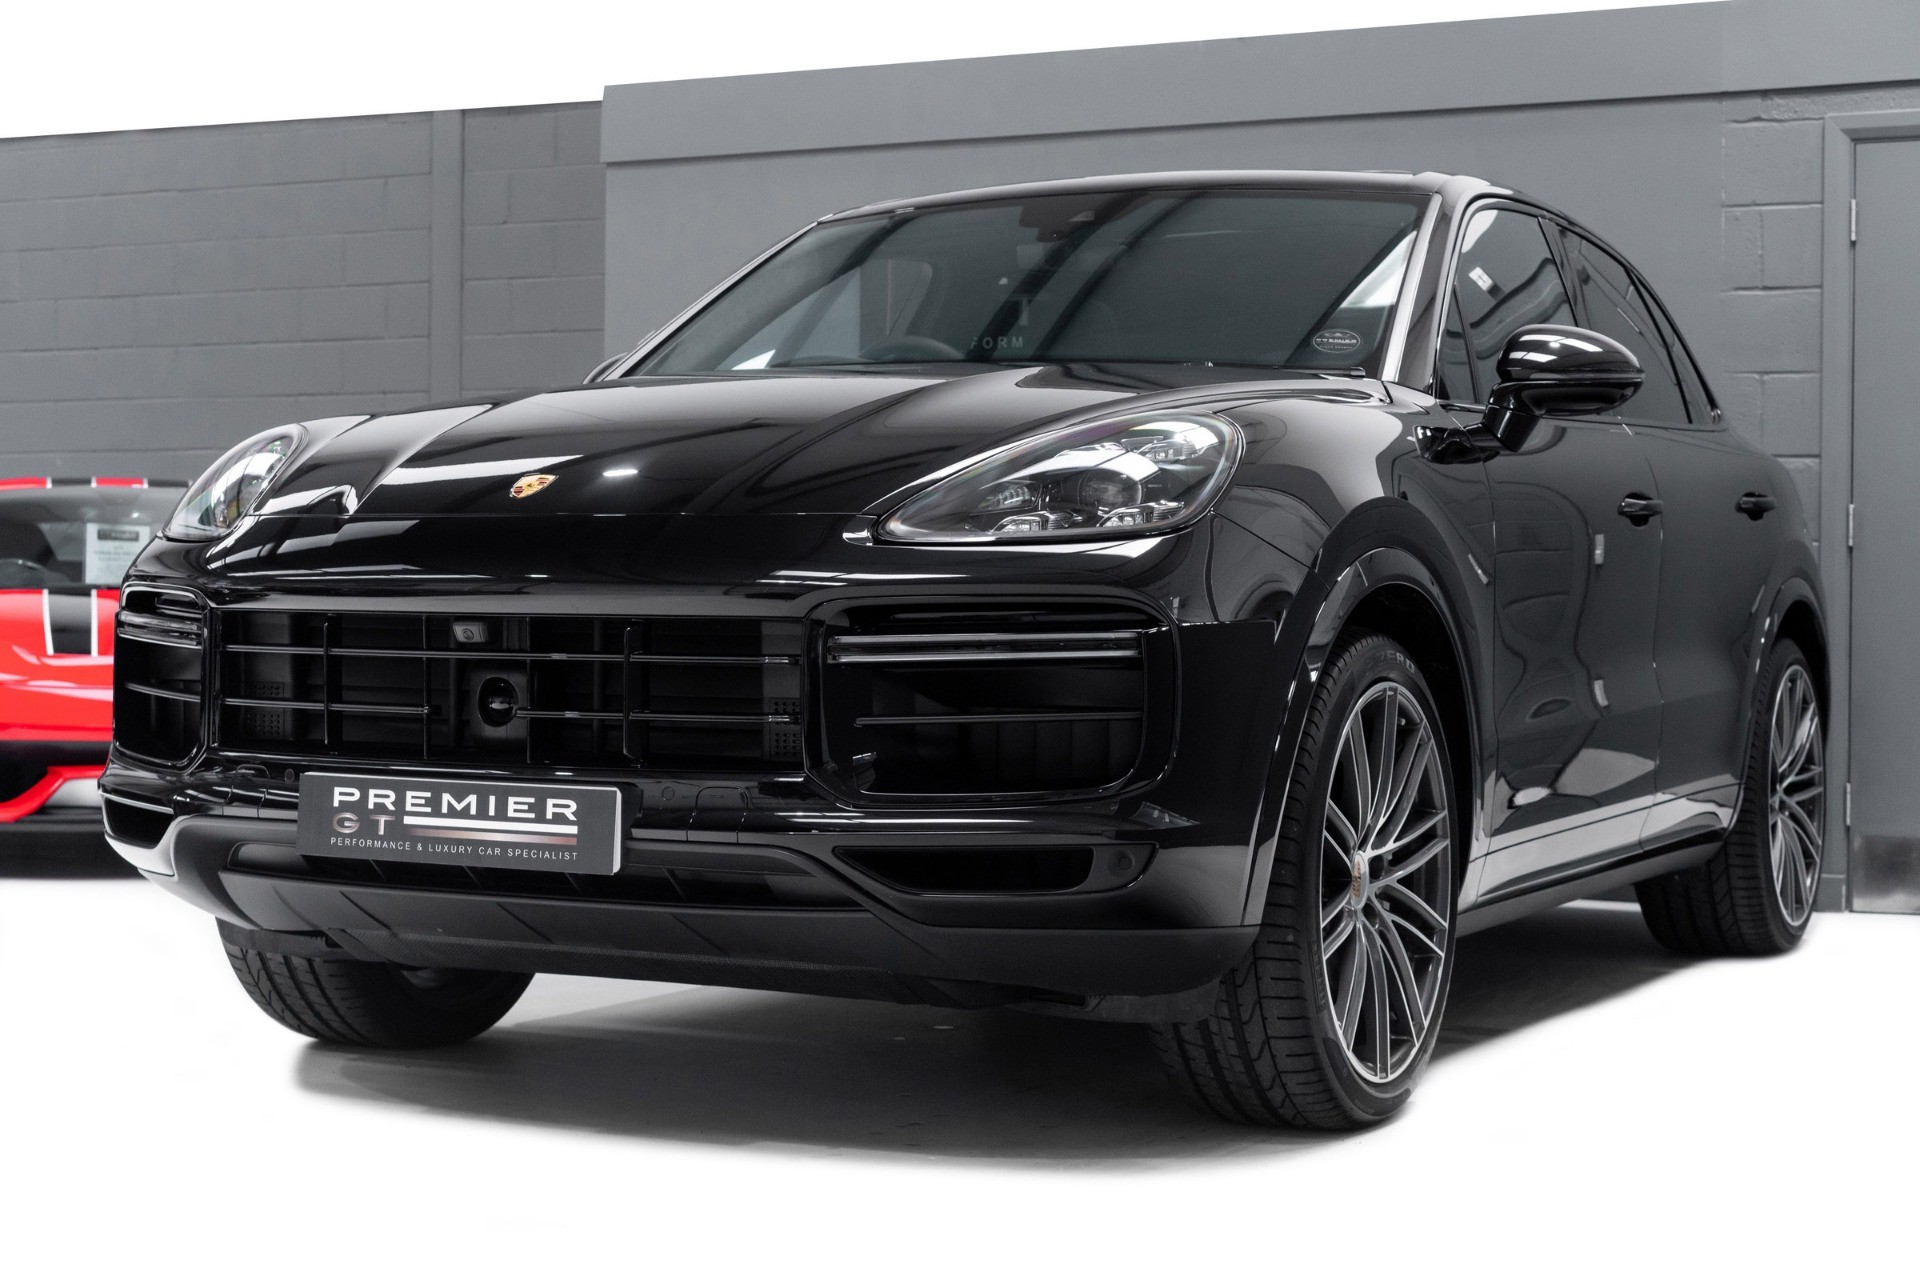 Used 2019 Porsche Cayenne 4.0 V8 TURBO TIPTRONIC. NOW SOLD